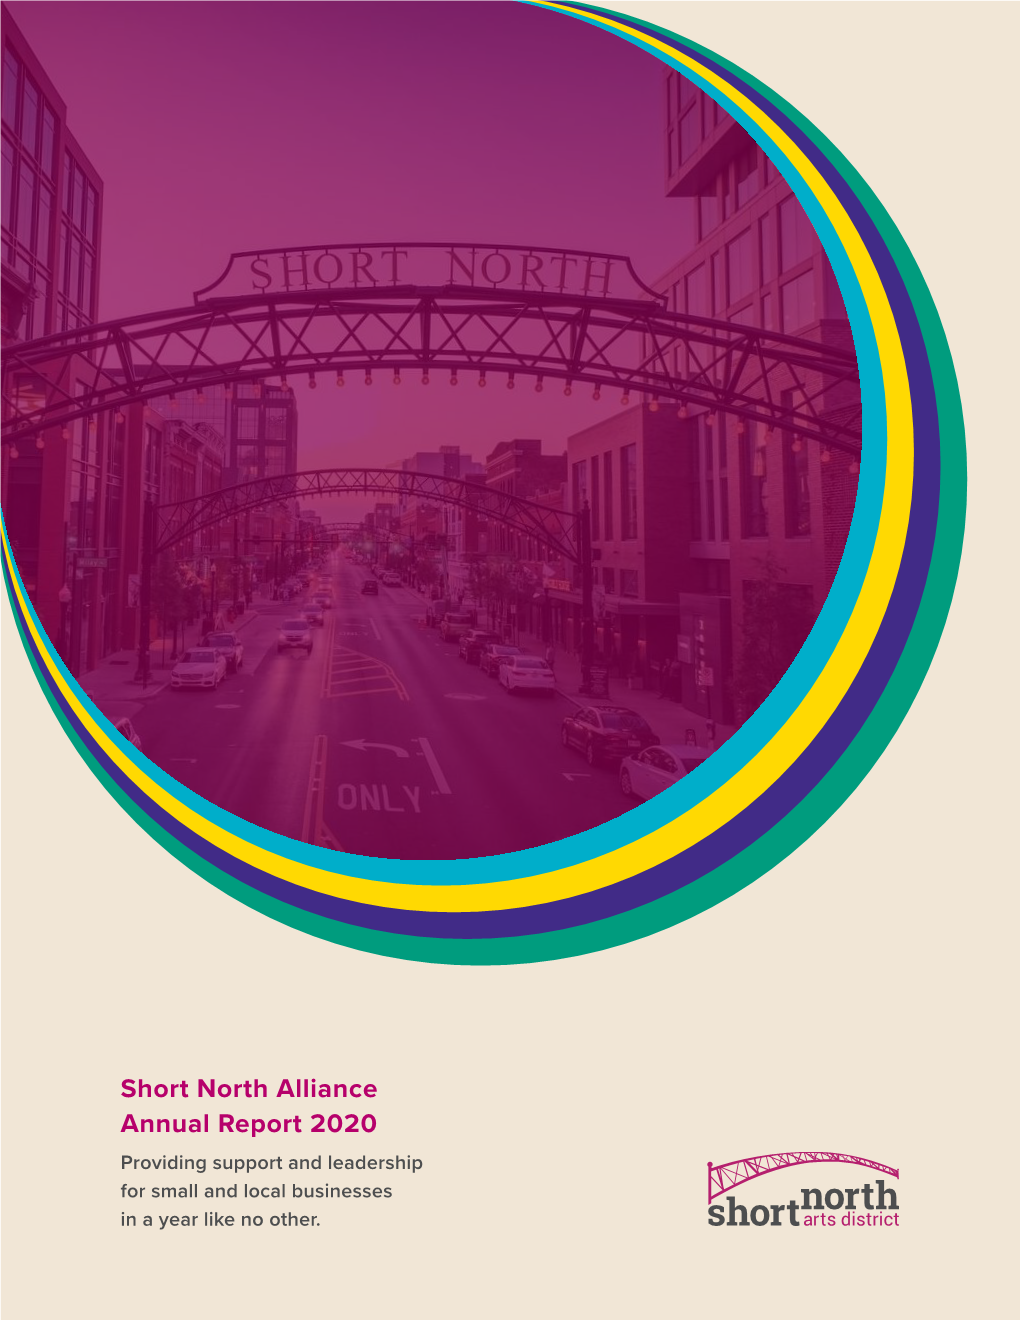 Short North Alliance Annual Report 2020 Providing Support and Leadership for Small and Local Businesses in a Year Like No Other